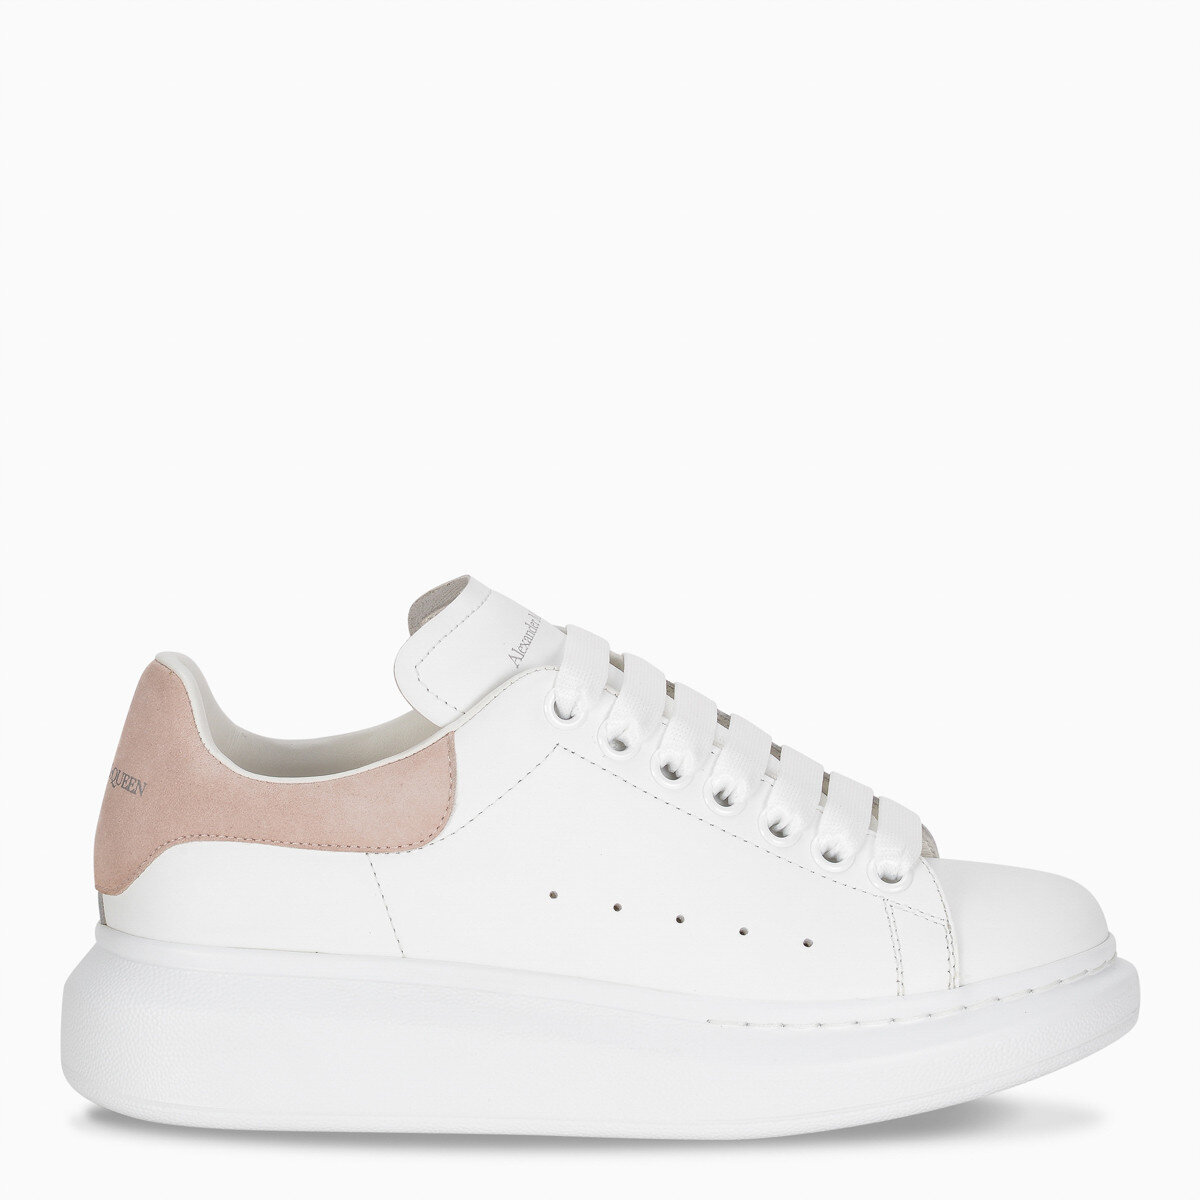 Alexander McQueen Oversized Sneakers in White/Patchouli Suede — UFO No More